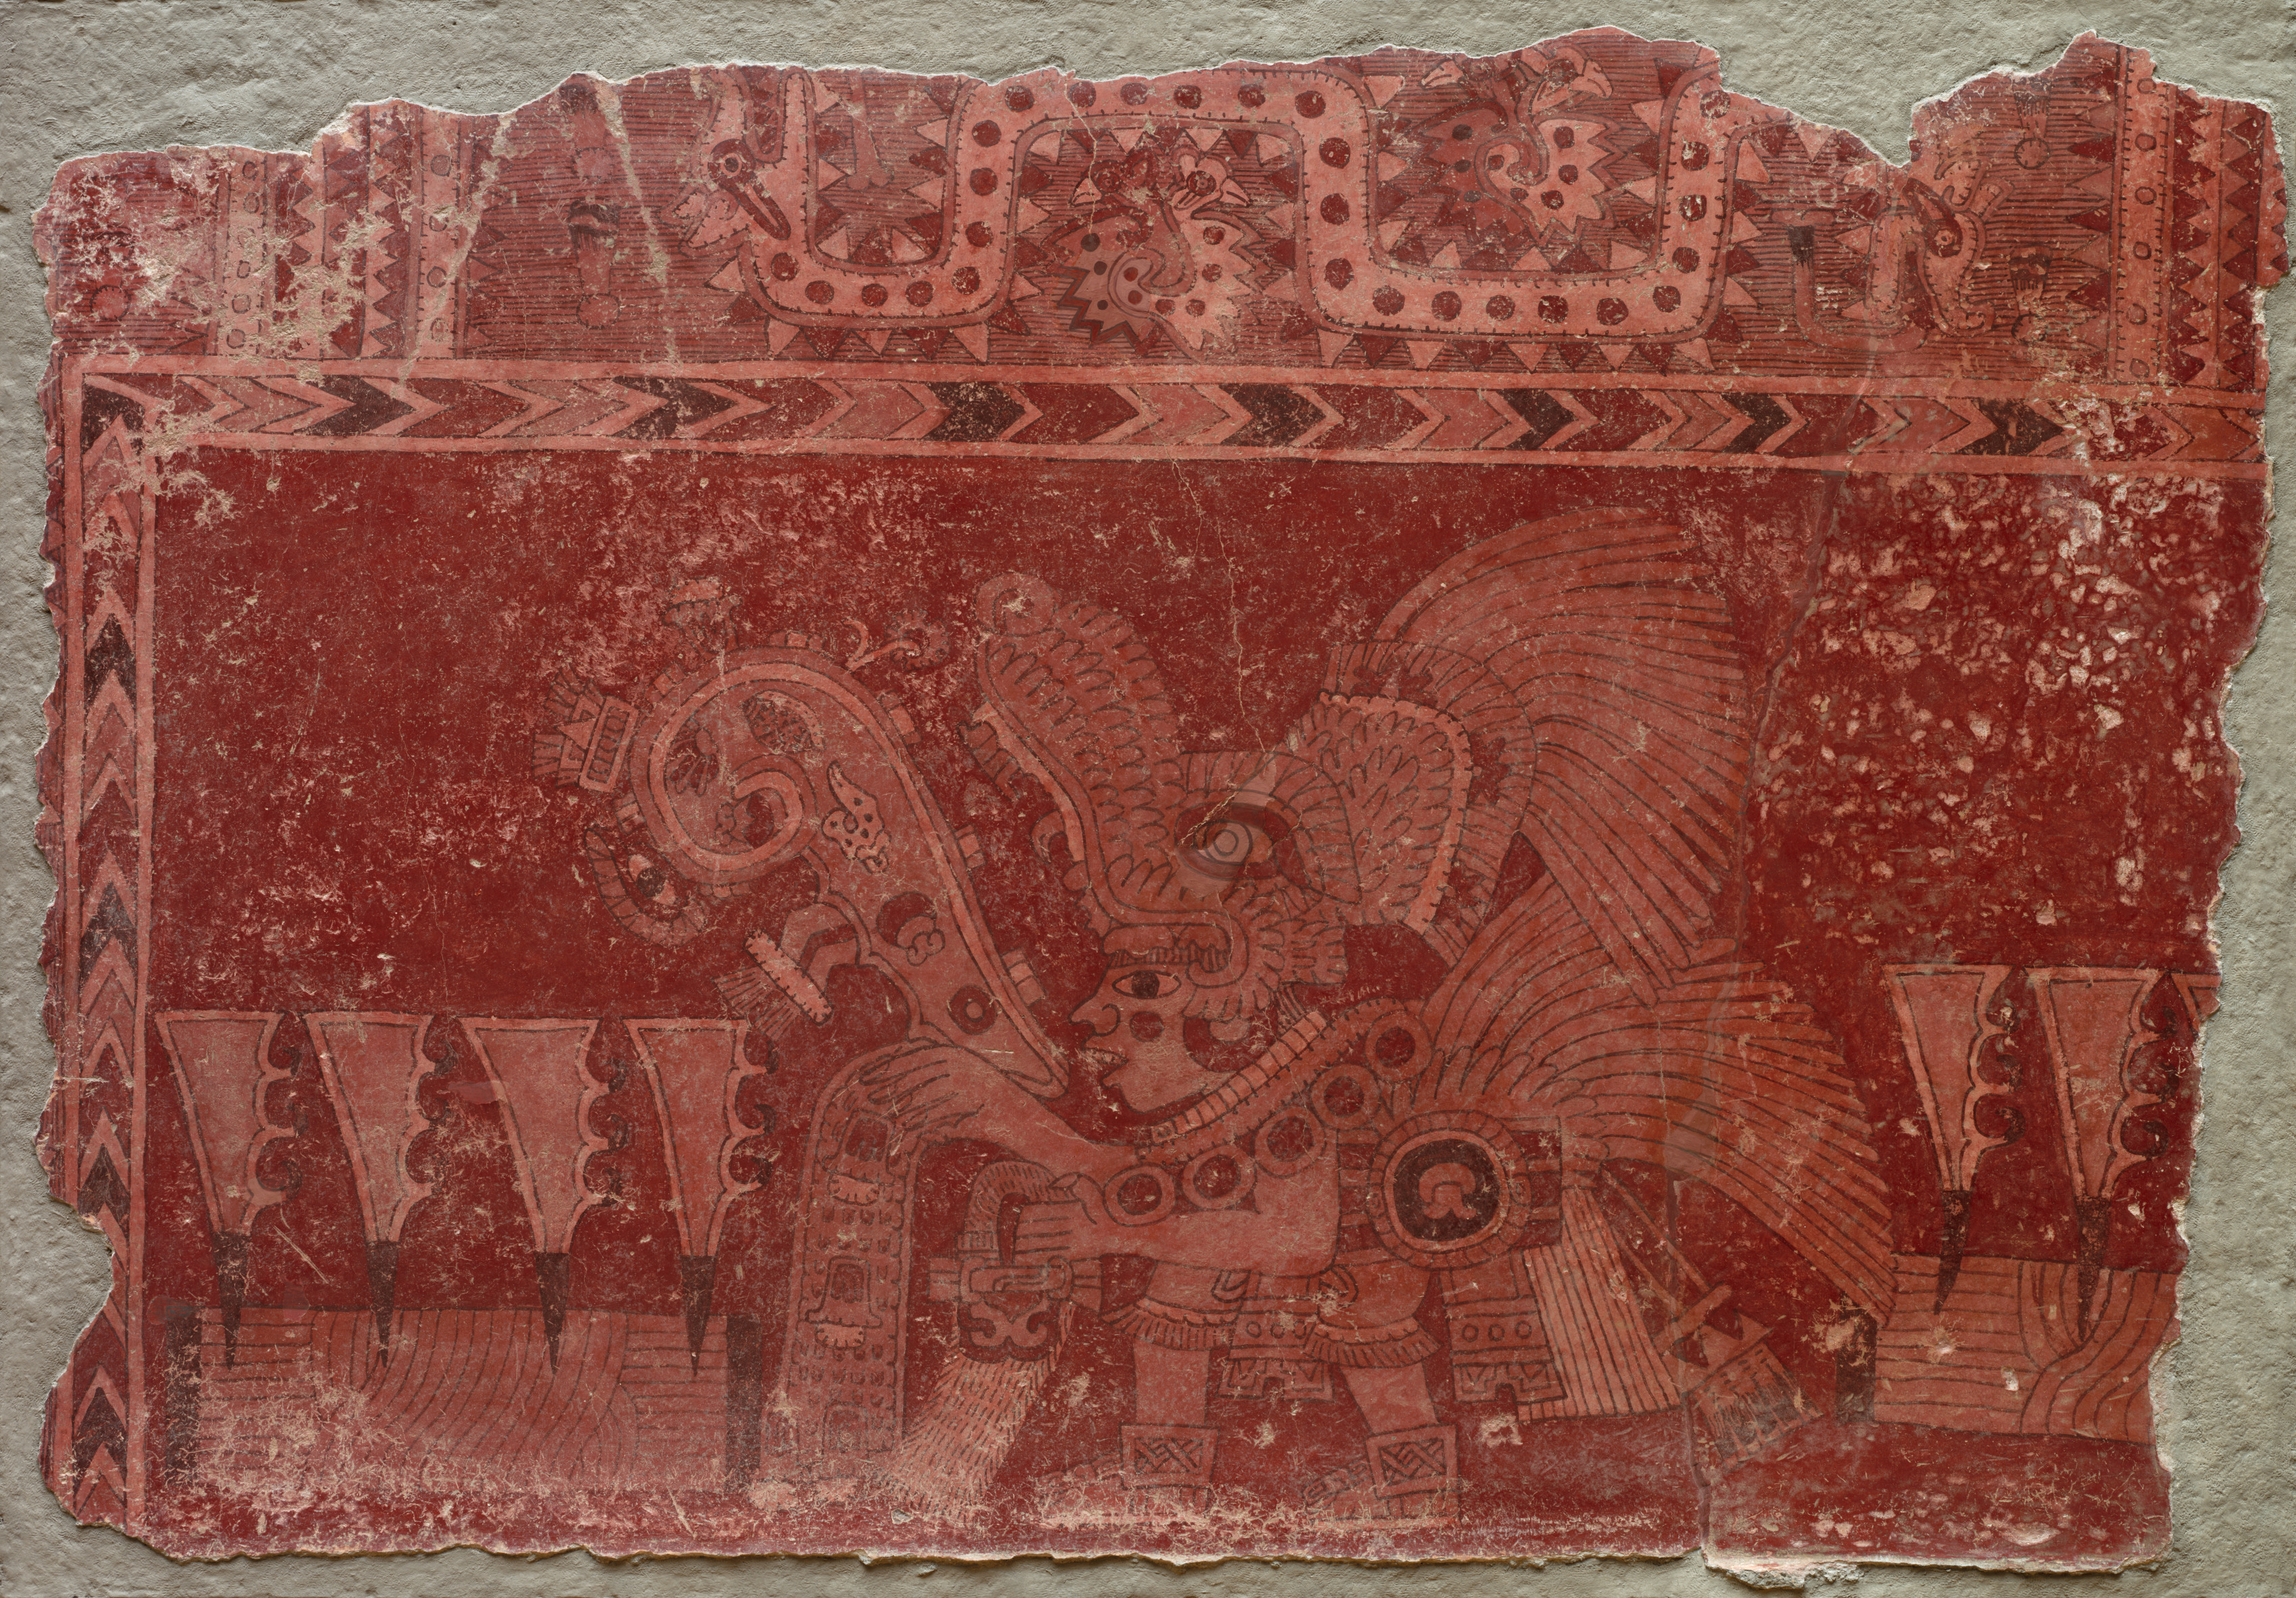 Mural Fragment with Elite Male and Maguey Cactus Leaves